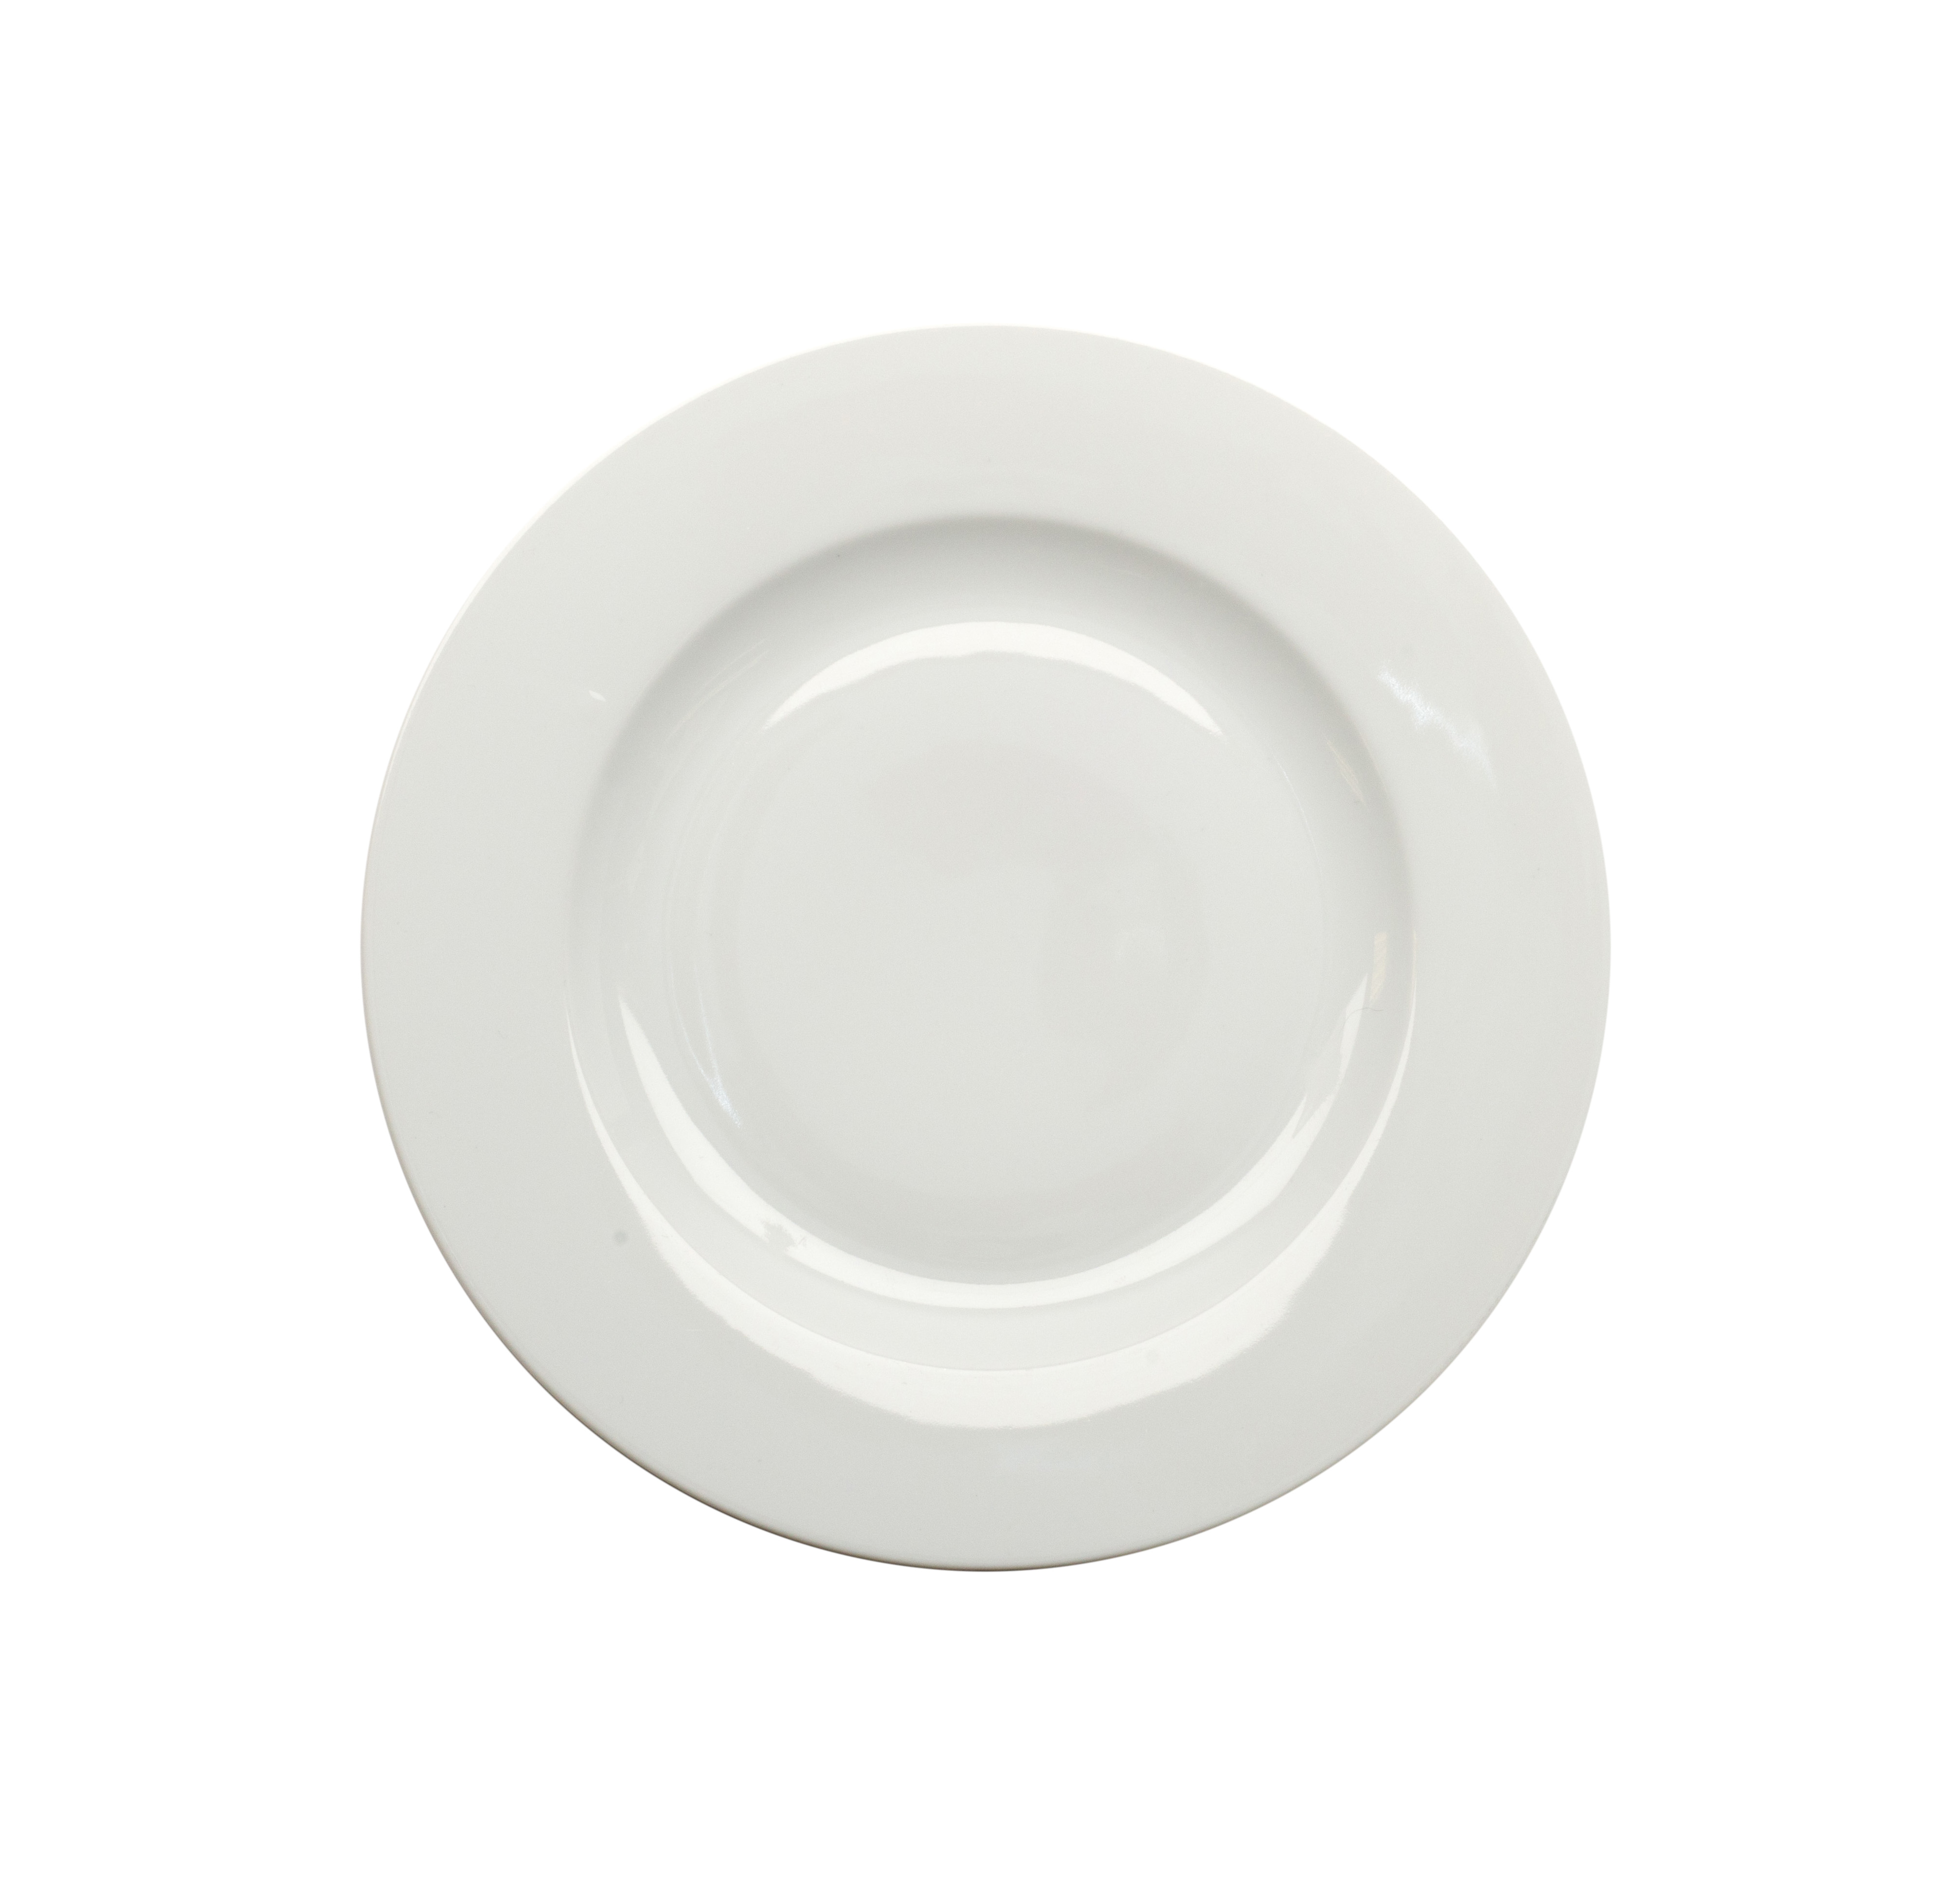 category_A3003 - Dinner Plate 10